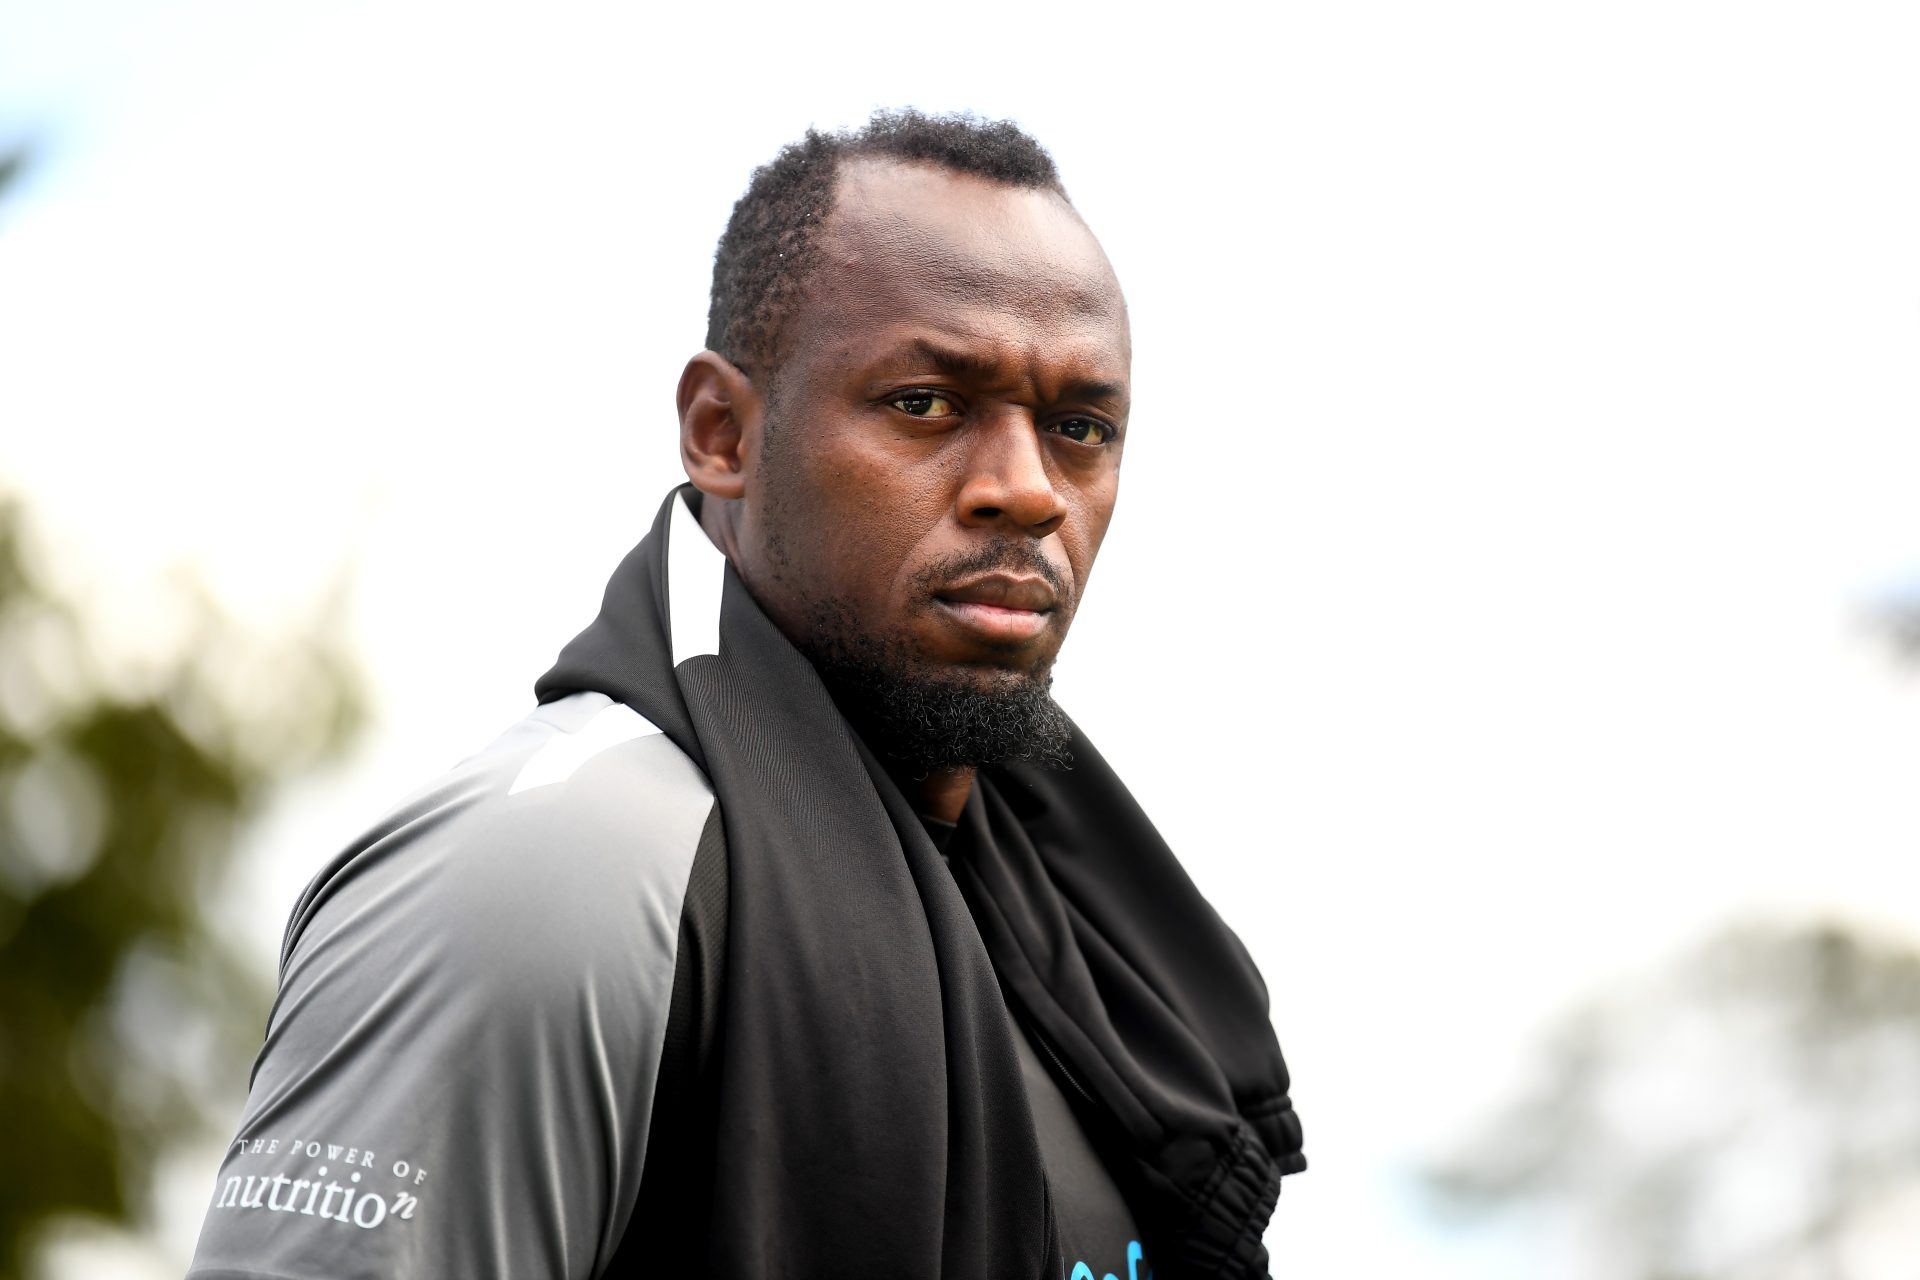 Usain Bolt On Fired Business Manager And Missing $12.7 MILLION: ‘It’s Put A Damper On Me’